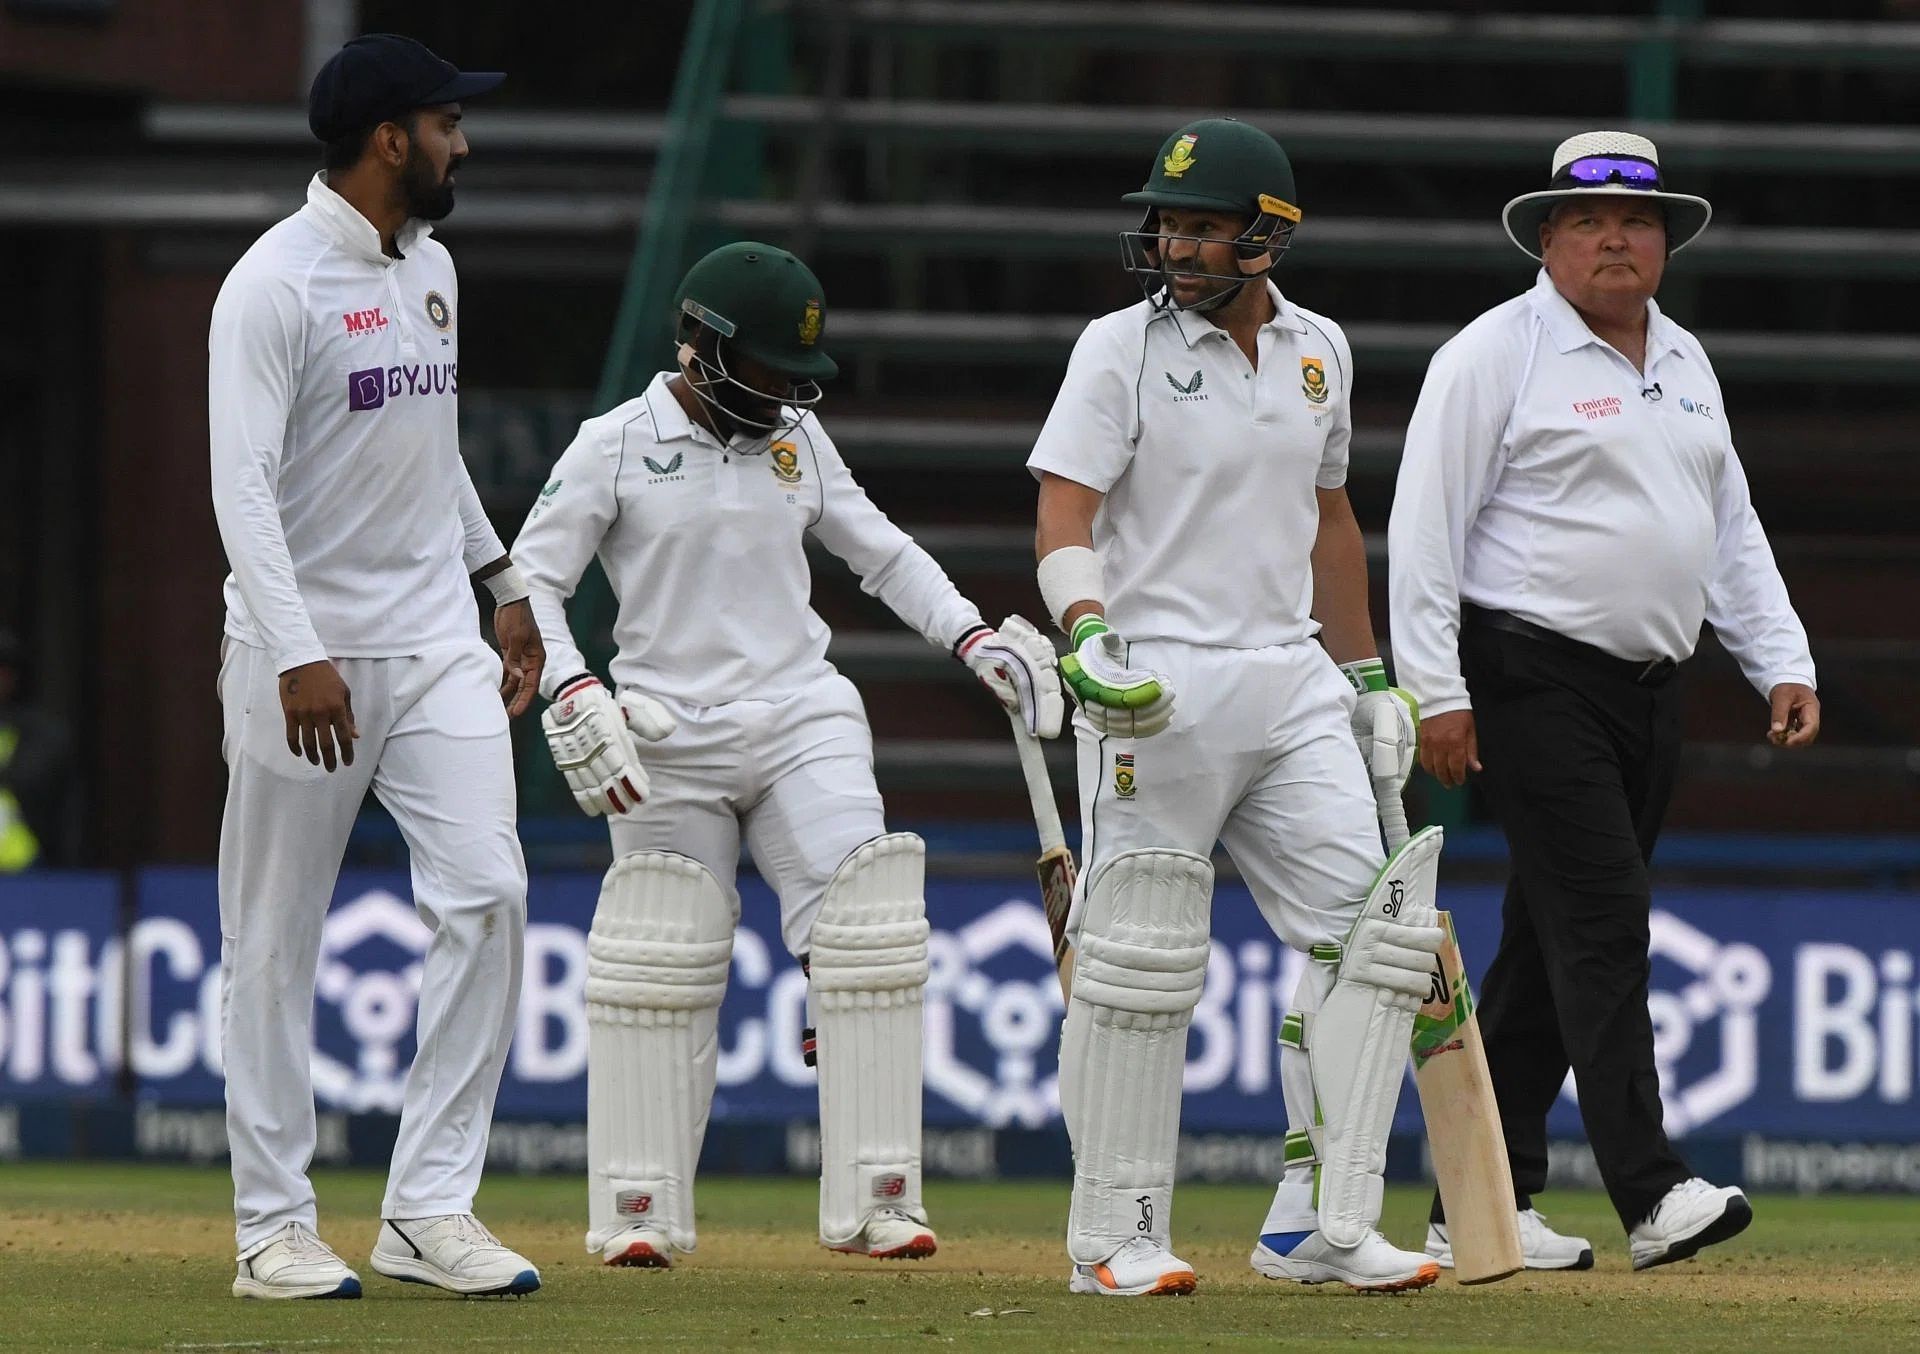 India suffered a 2-1 defeat in their last Test series in South Africa. [P/C: Getty]